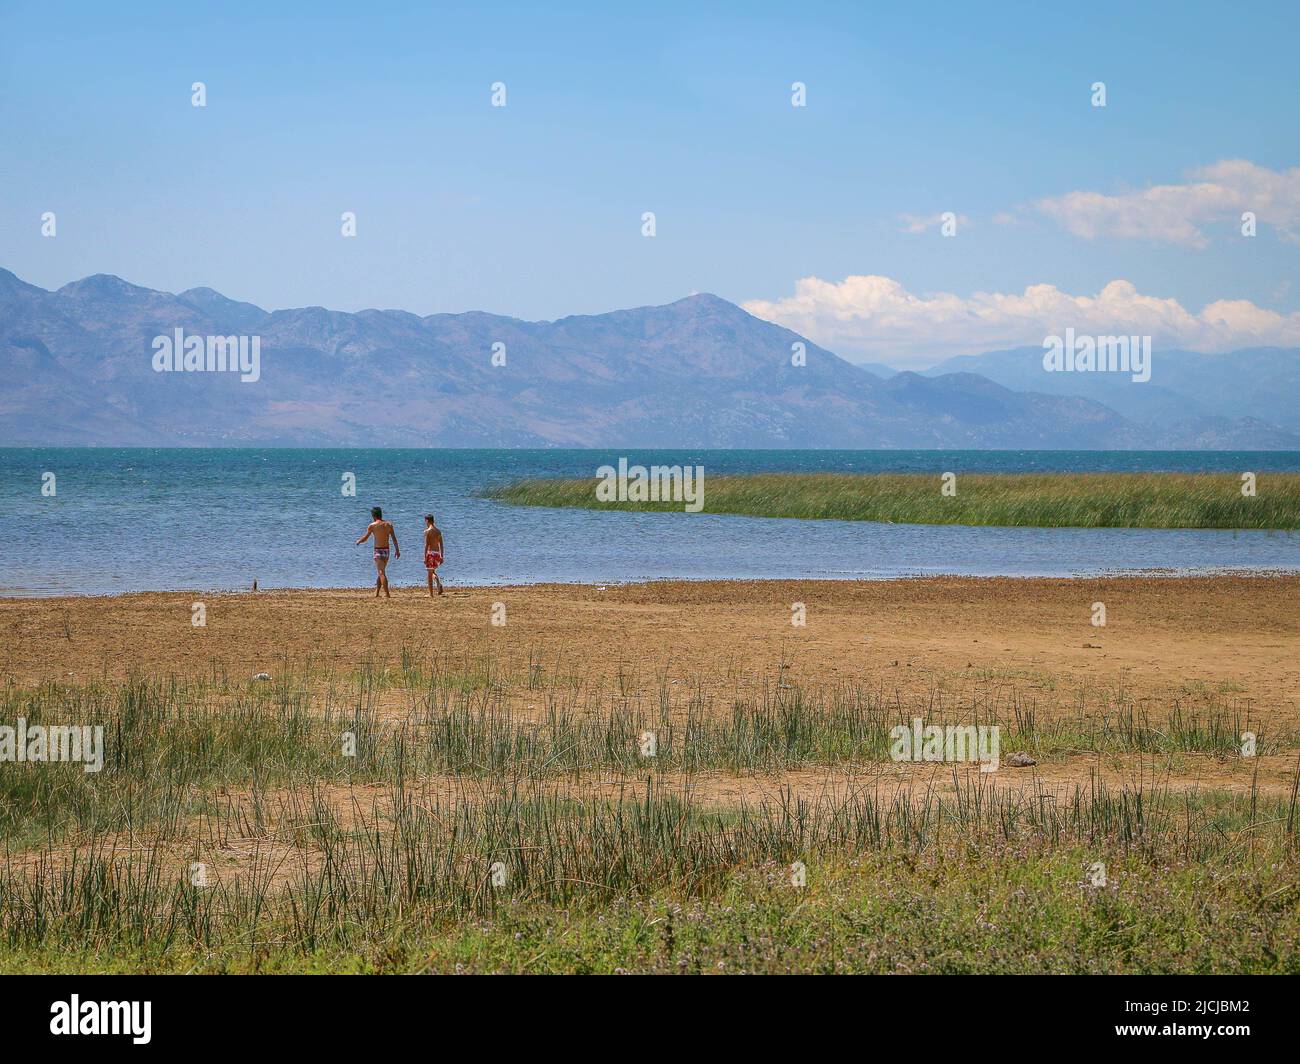 Lake Skadar, Albania - 28.07.2017: Two men are walking along the beach of the Lake Skadar, covered with green and yellow grass with the blue mountains Stock Photo